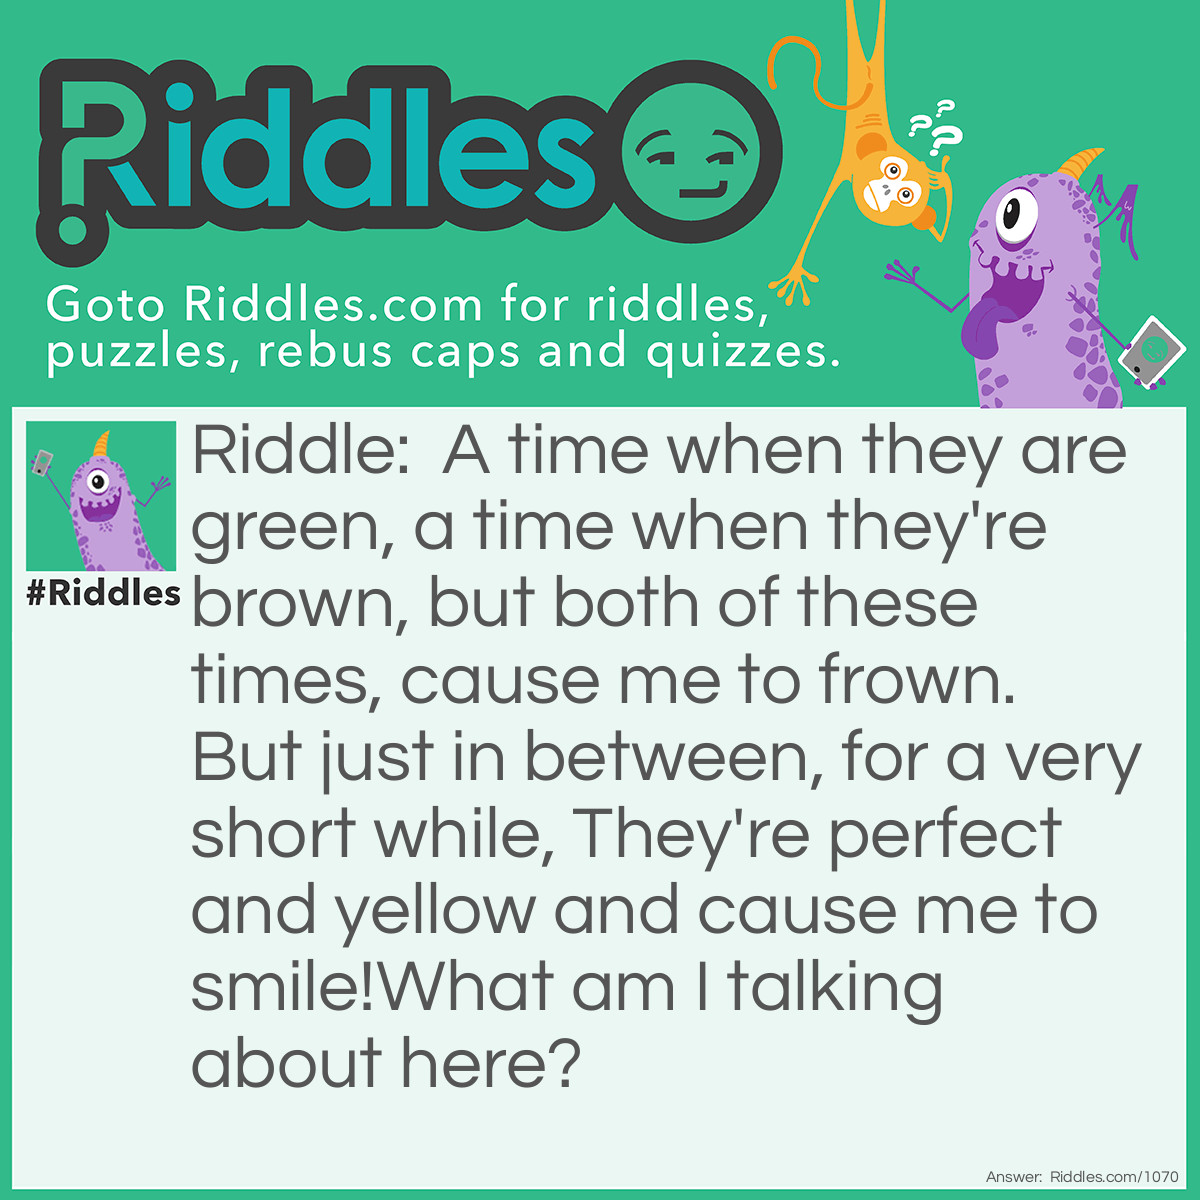 Riddle: A time when they are green, a time when they're brown, but both of these times, cause me to frown. But just in between, for a very short while, They're perfect and yellow and cause me to smile!
What am I talking about here? Answer: Bananas.